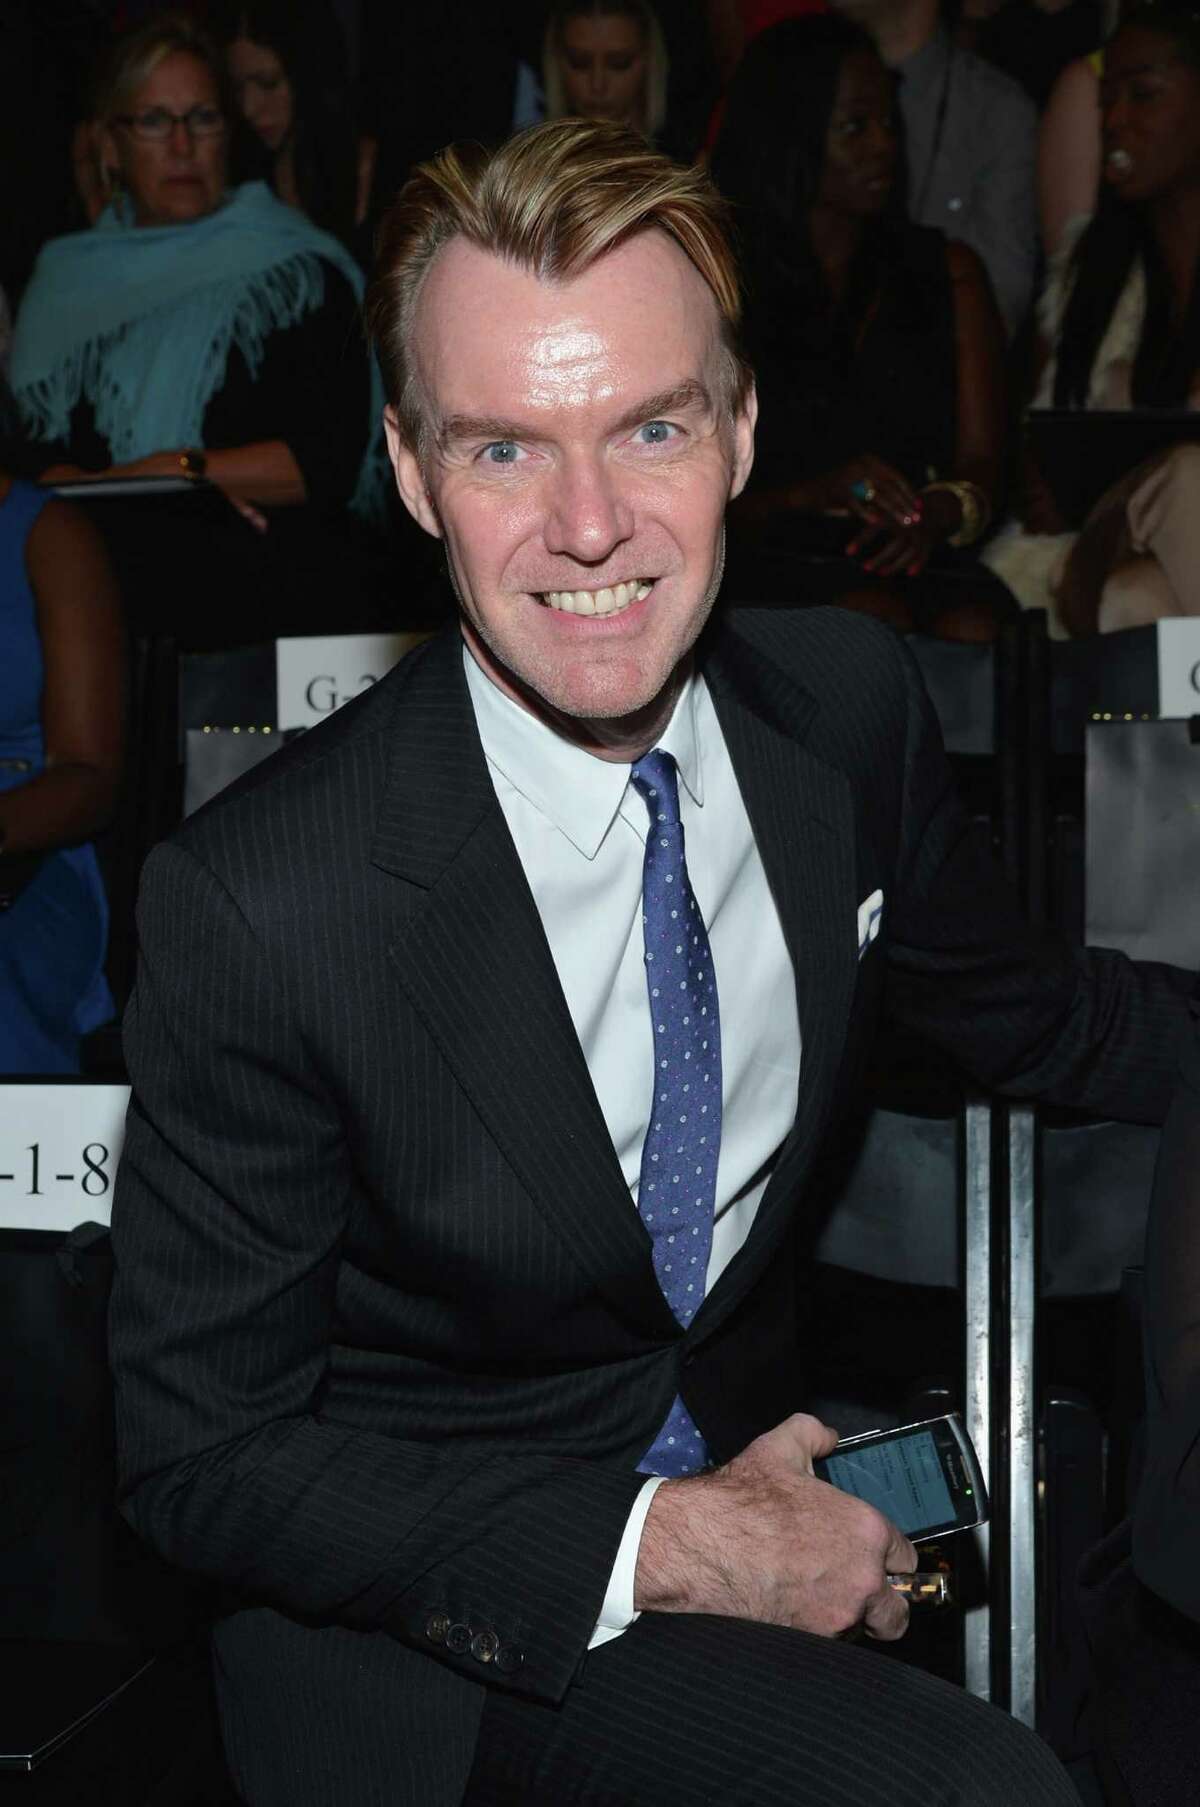 Ken Downing, Neiman Marcus fashion director says his fashionable resolution is about collecting art.